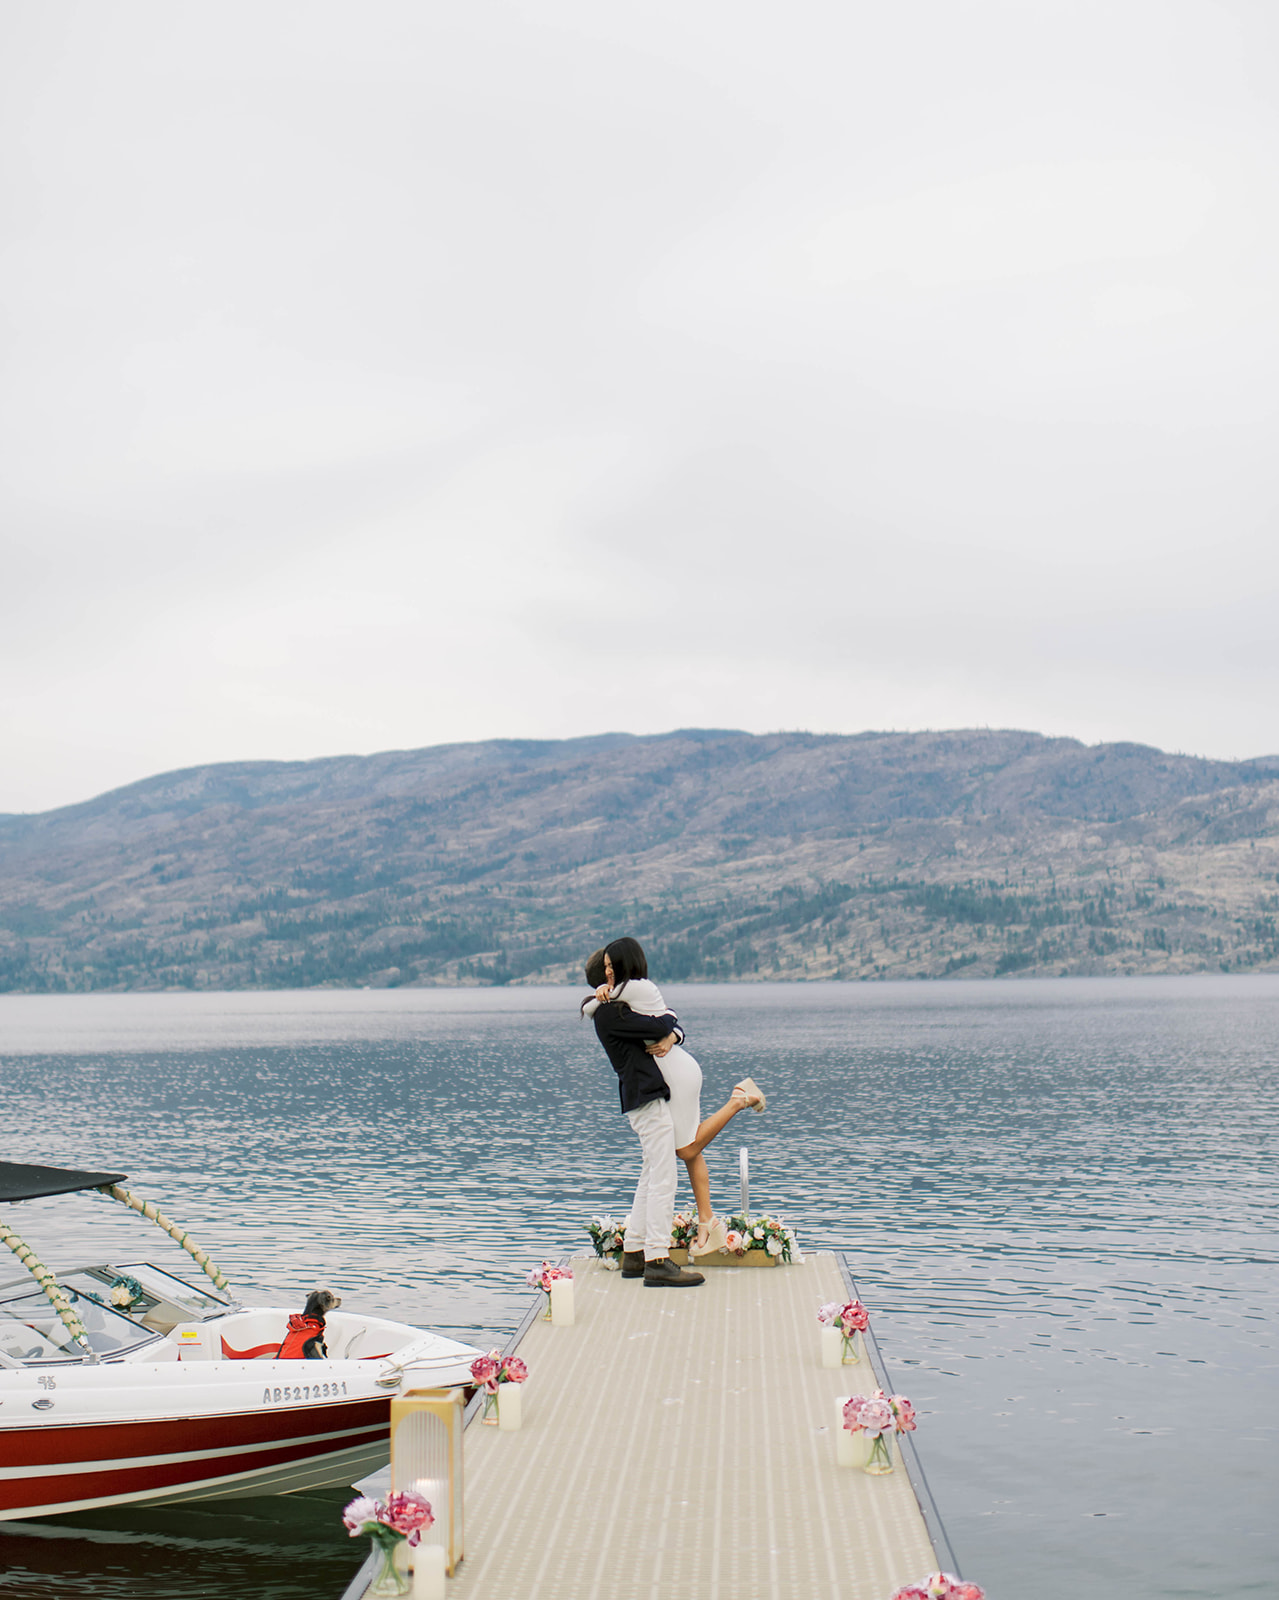 Perfectly Planned Romantic Proposal at Peachland Beach, in the Okanagan Valley, captured on film by Kelowna Wedding Photographer, Minted Photography. - okanagan engagement and wedding inspiration, bc engagement and wedding inspiration, proposal inspiration, summer proposal ideas
